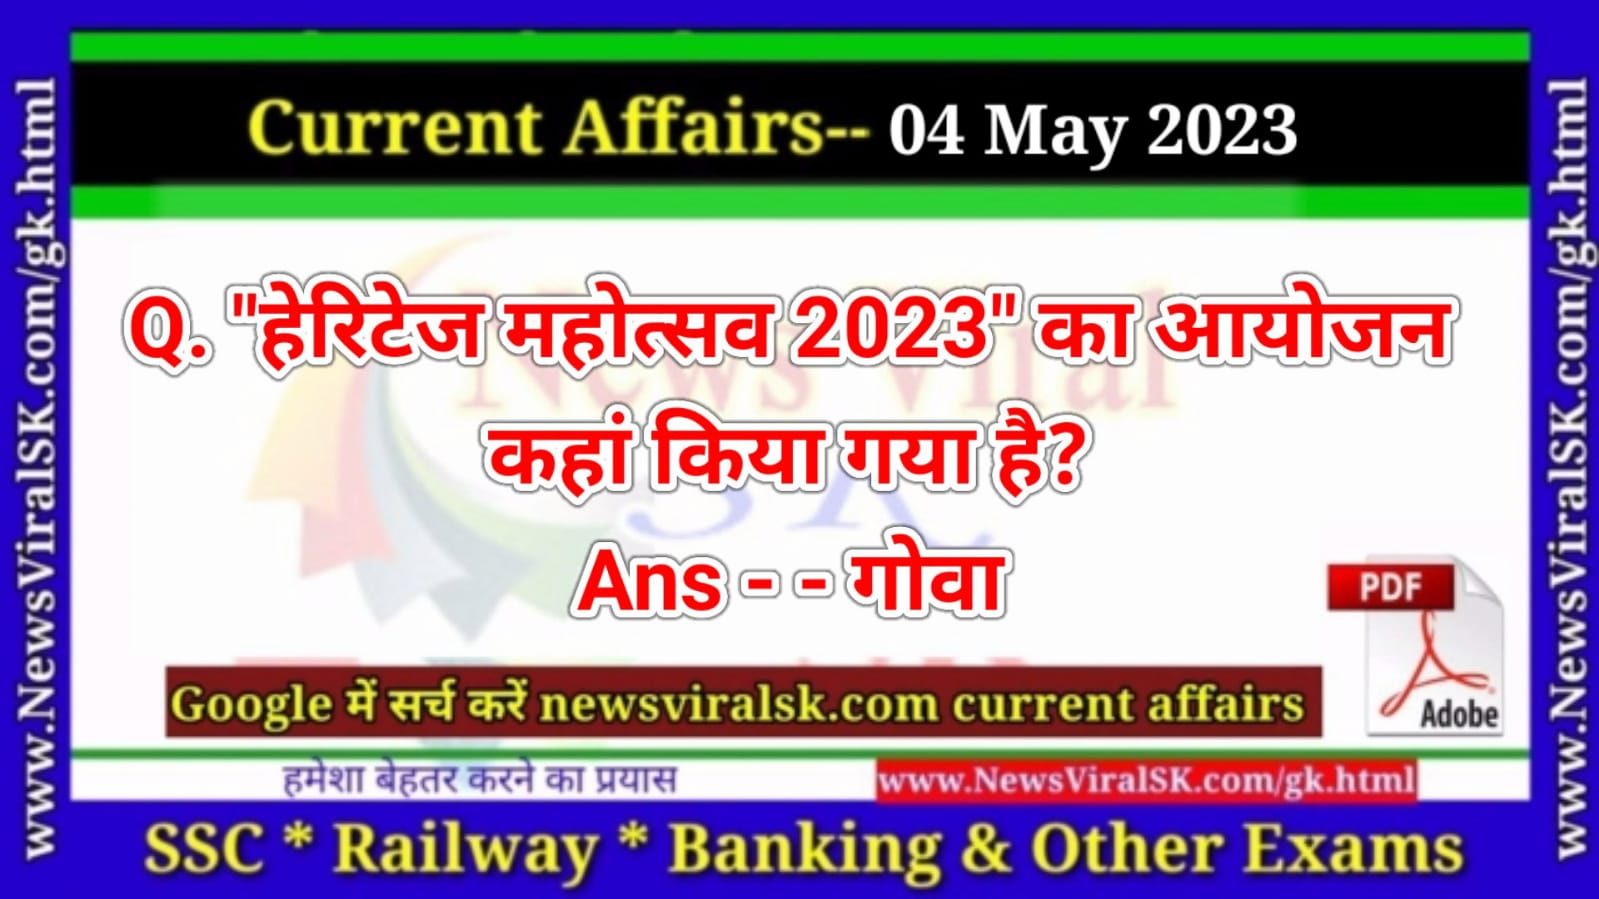 Daily Current Affairs pdf Download 04 May 2023